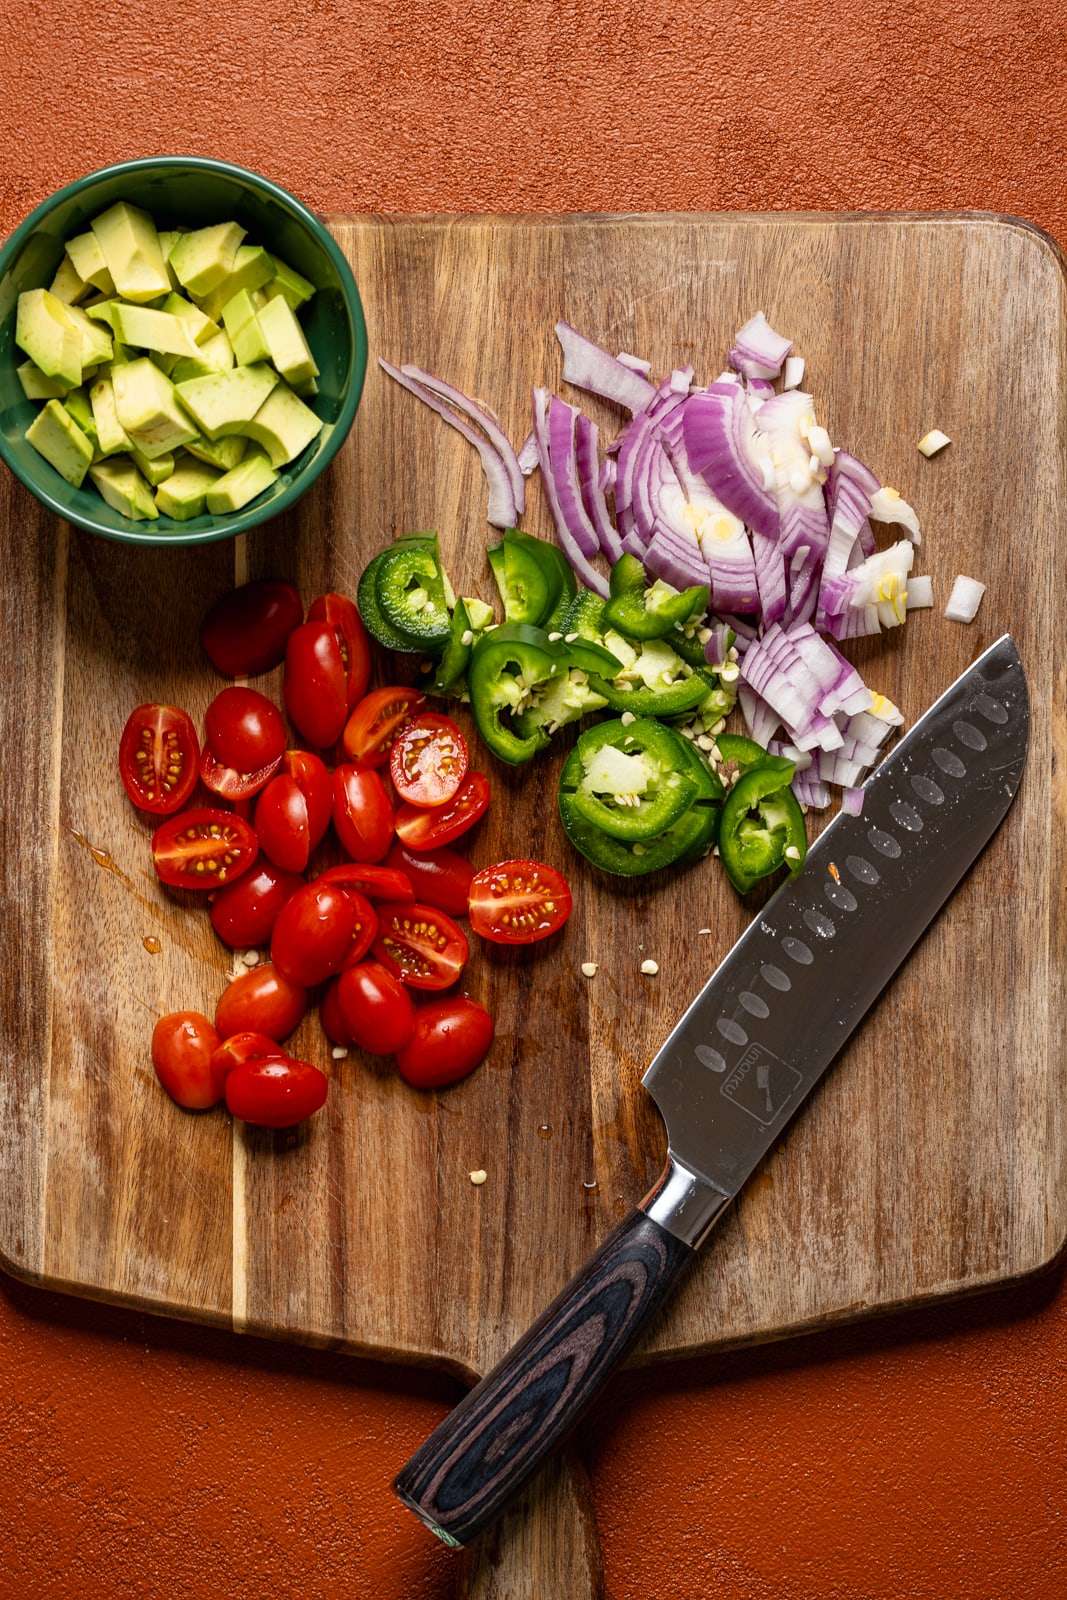 Ingredients chopped on a cutting board with a knife.